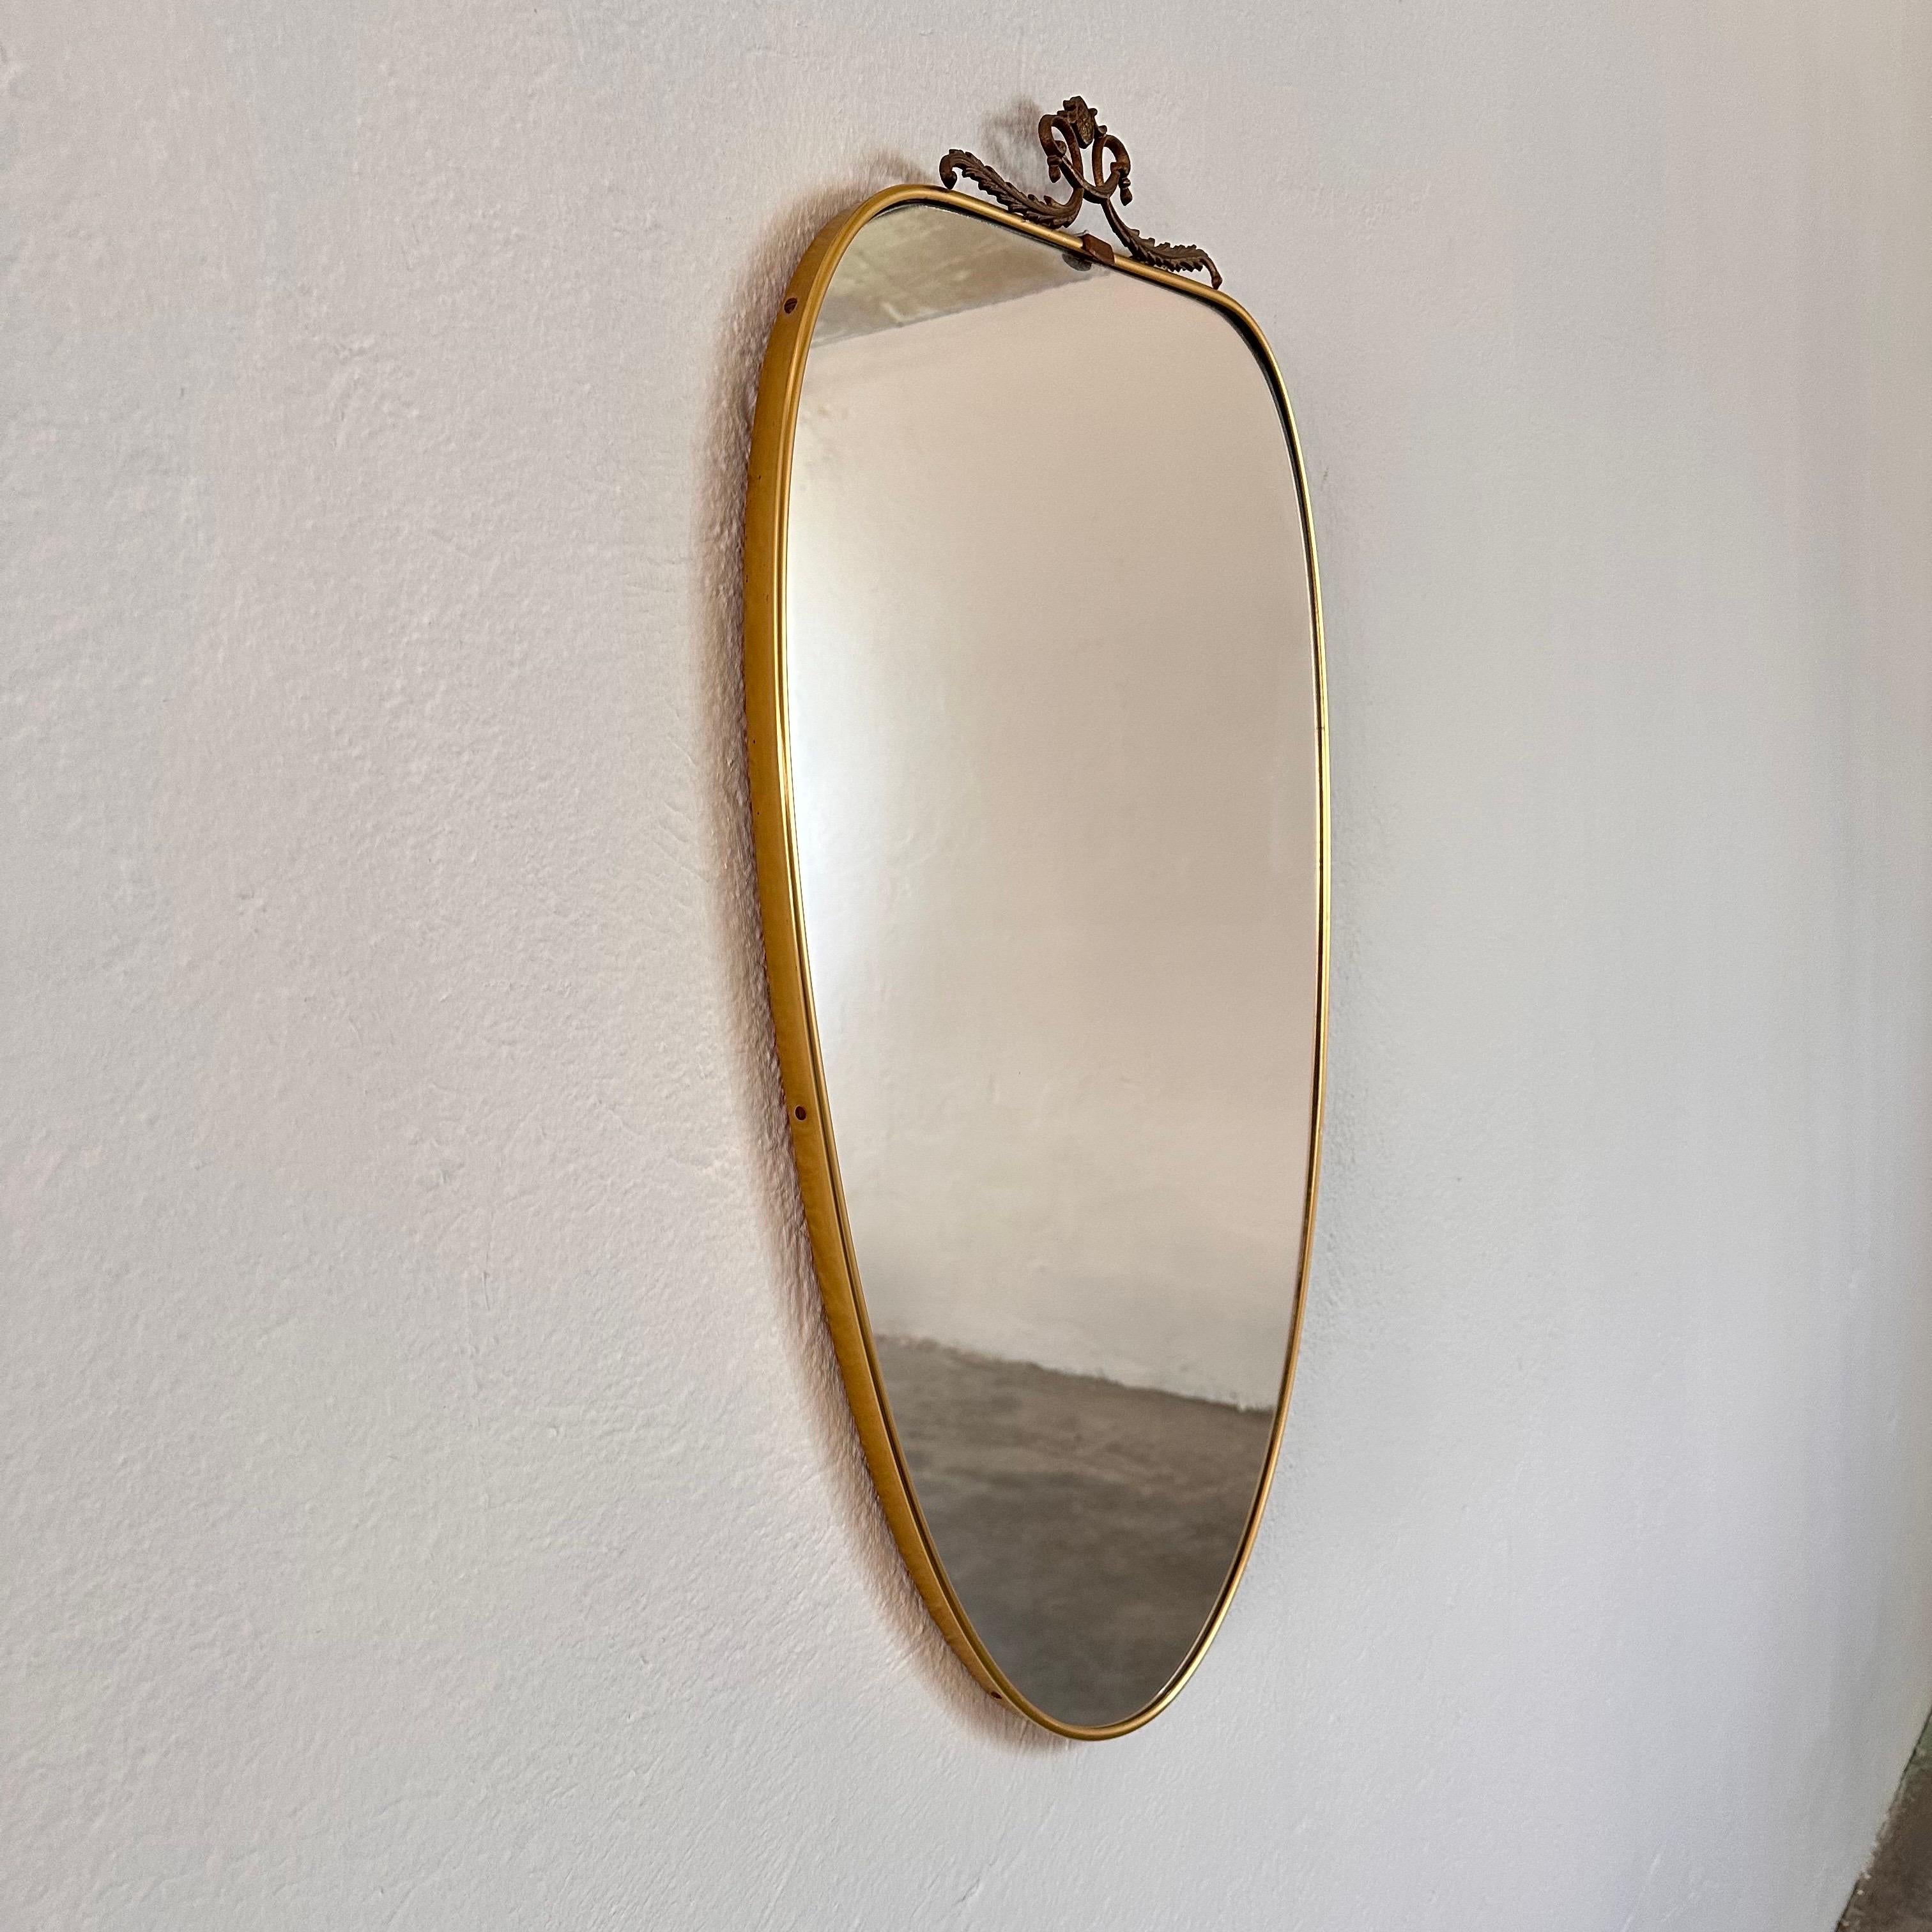 
Elevate your interior with this stunning shield mirror, crafted in Italy during the 1950s and designed in the iconic style reminiscent of Gio Ponti. With its sleek lines and timeless elegance, this mirror is sure to make a statement in any